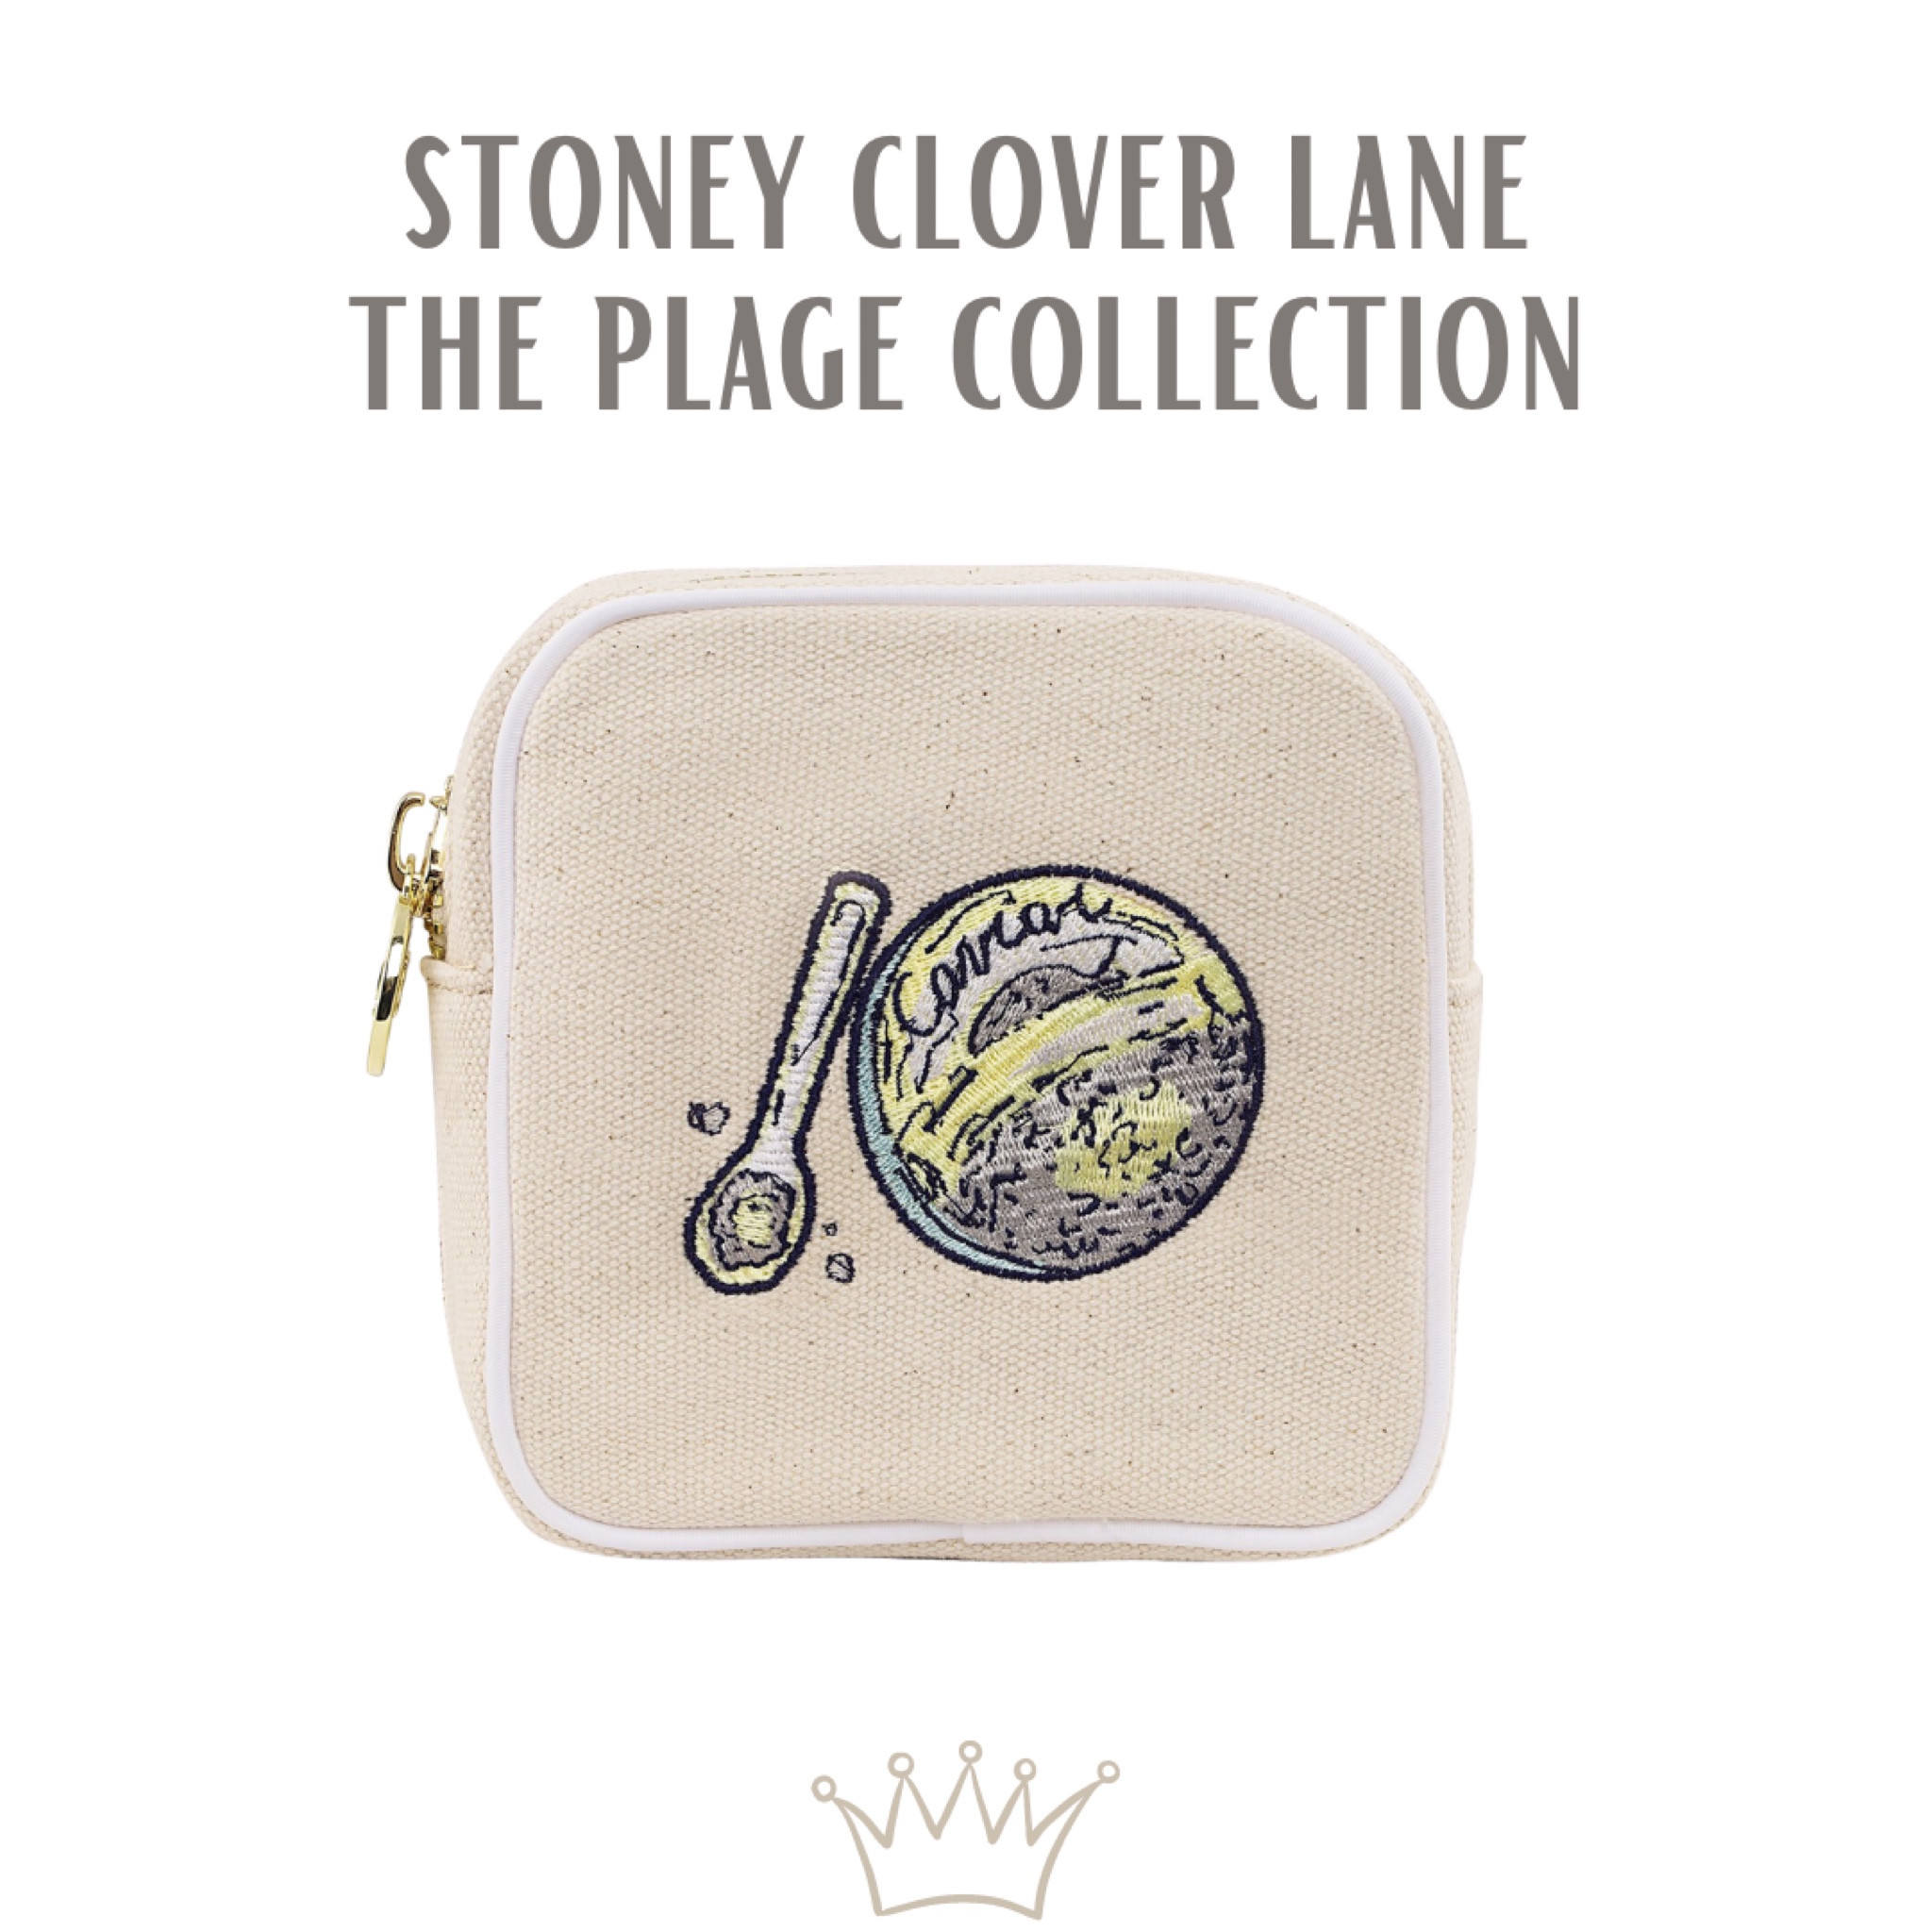 Stoney Clover Lane x Target Orange Mini Circle Pouch NWT IN HAND SOLD OUT